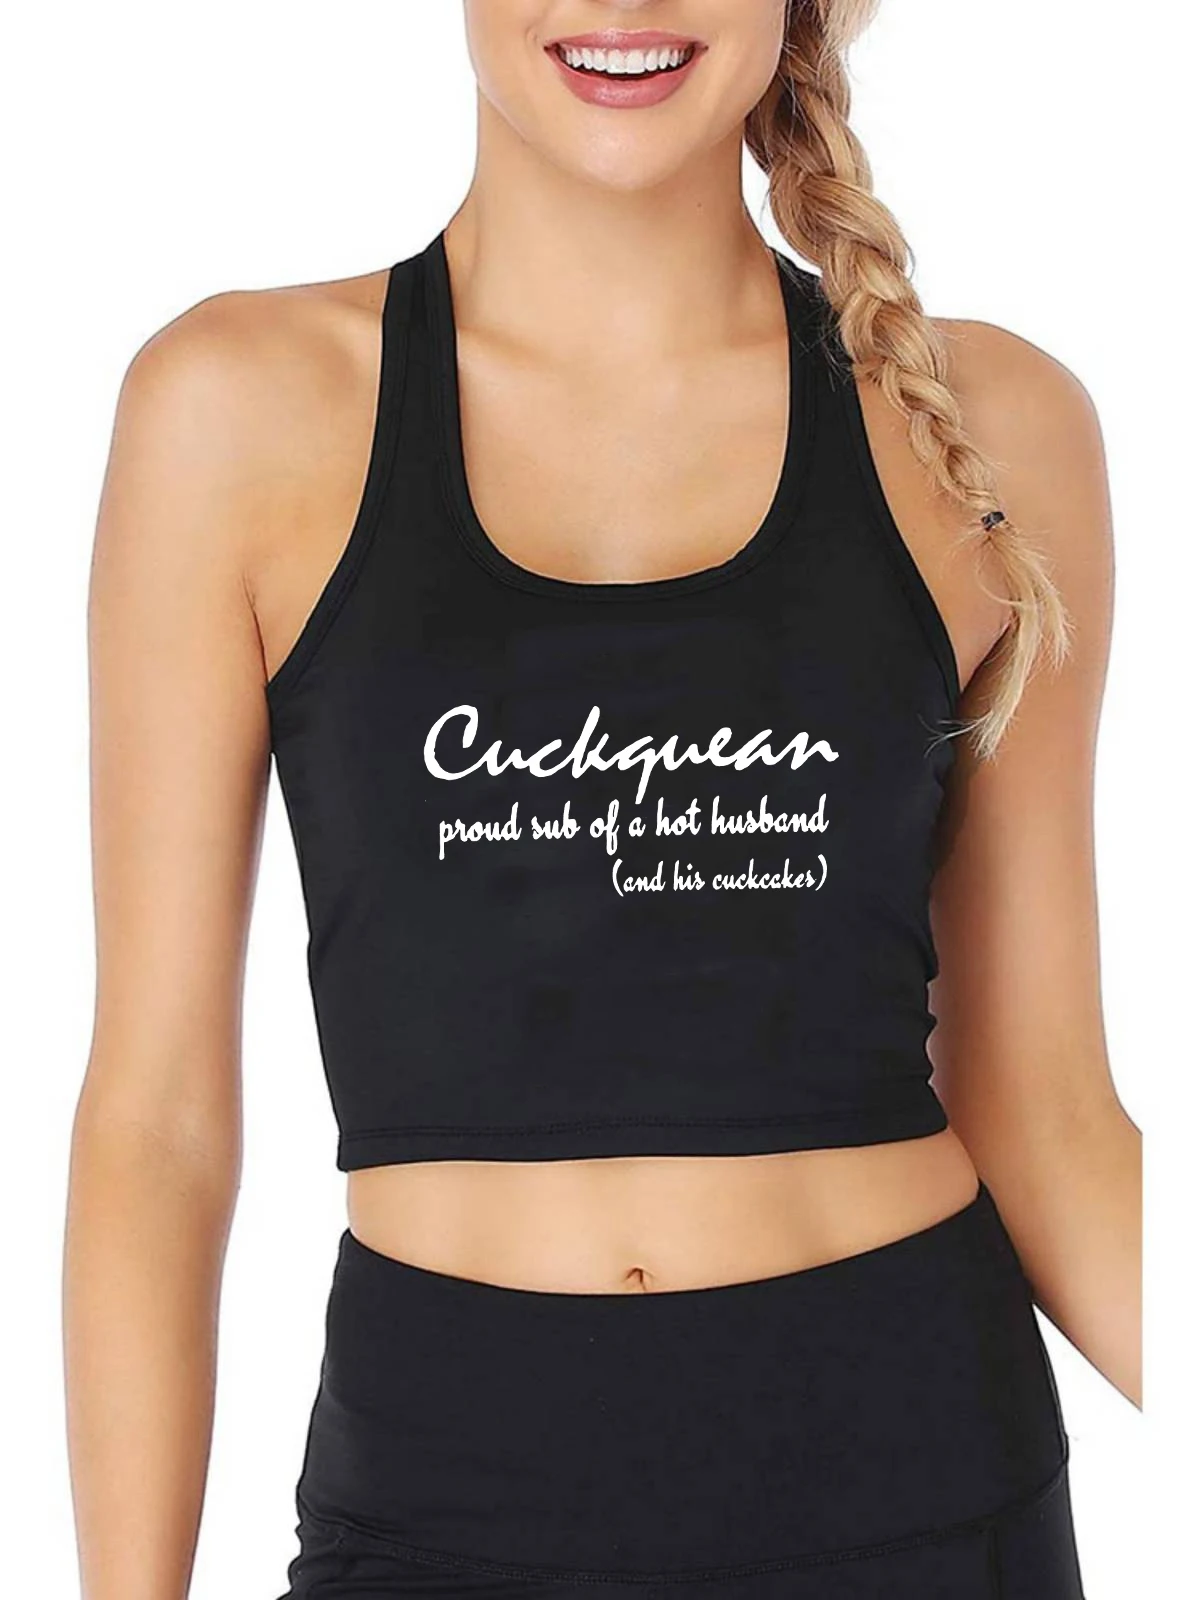 

Cuckquean Proud Sub Of A Hot Husband Design Sexy Slim Fit Crop Top Ideal Gift Tank Tops For A Cuckquean Wife Fitness Camisole